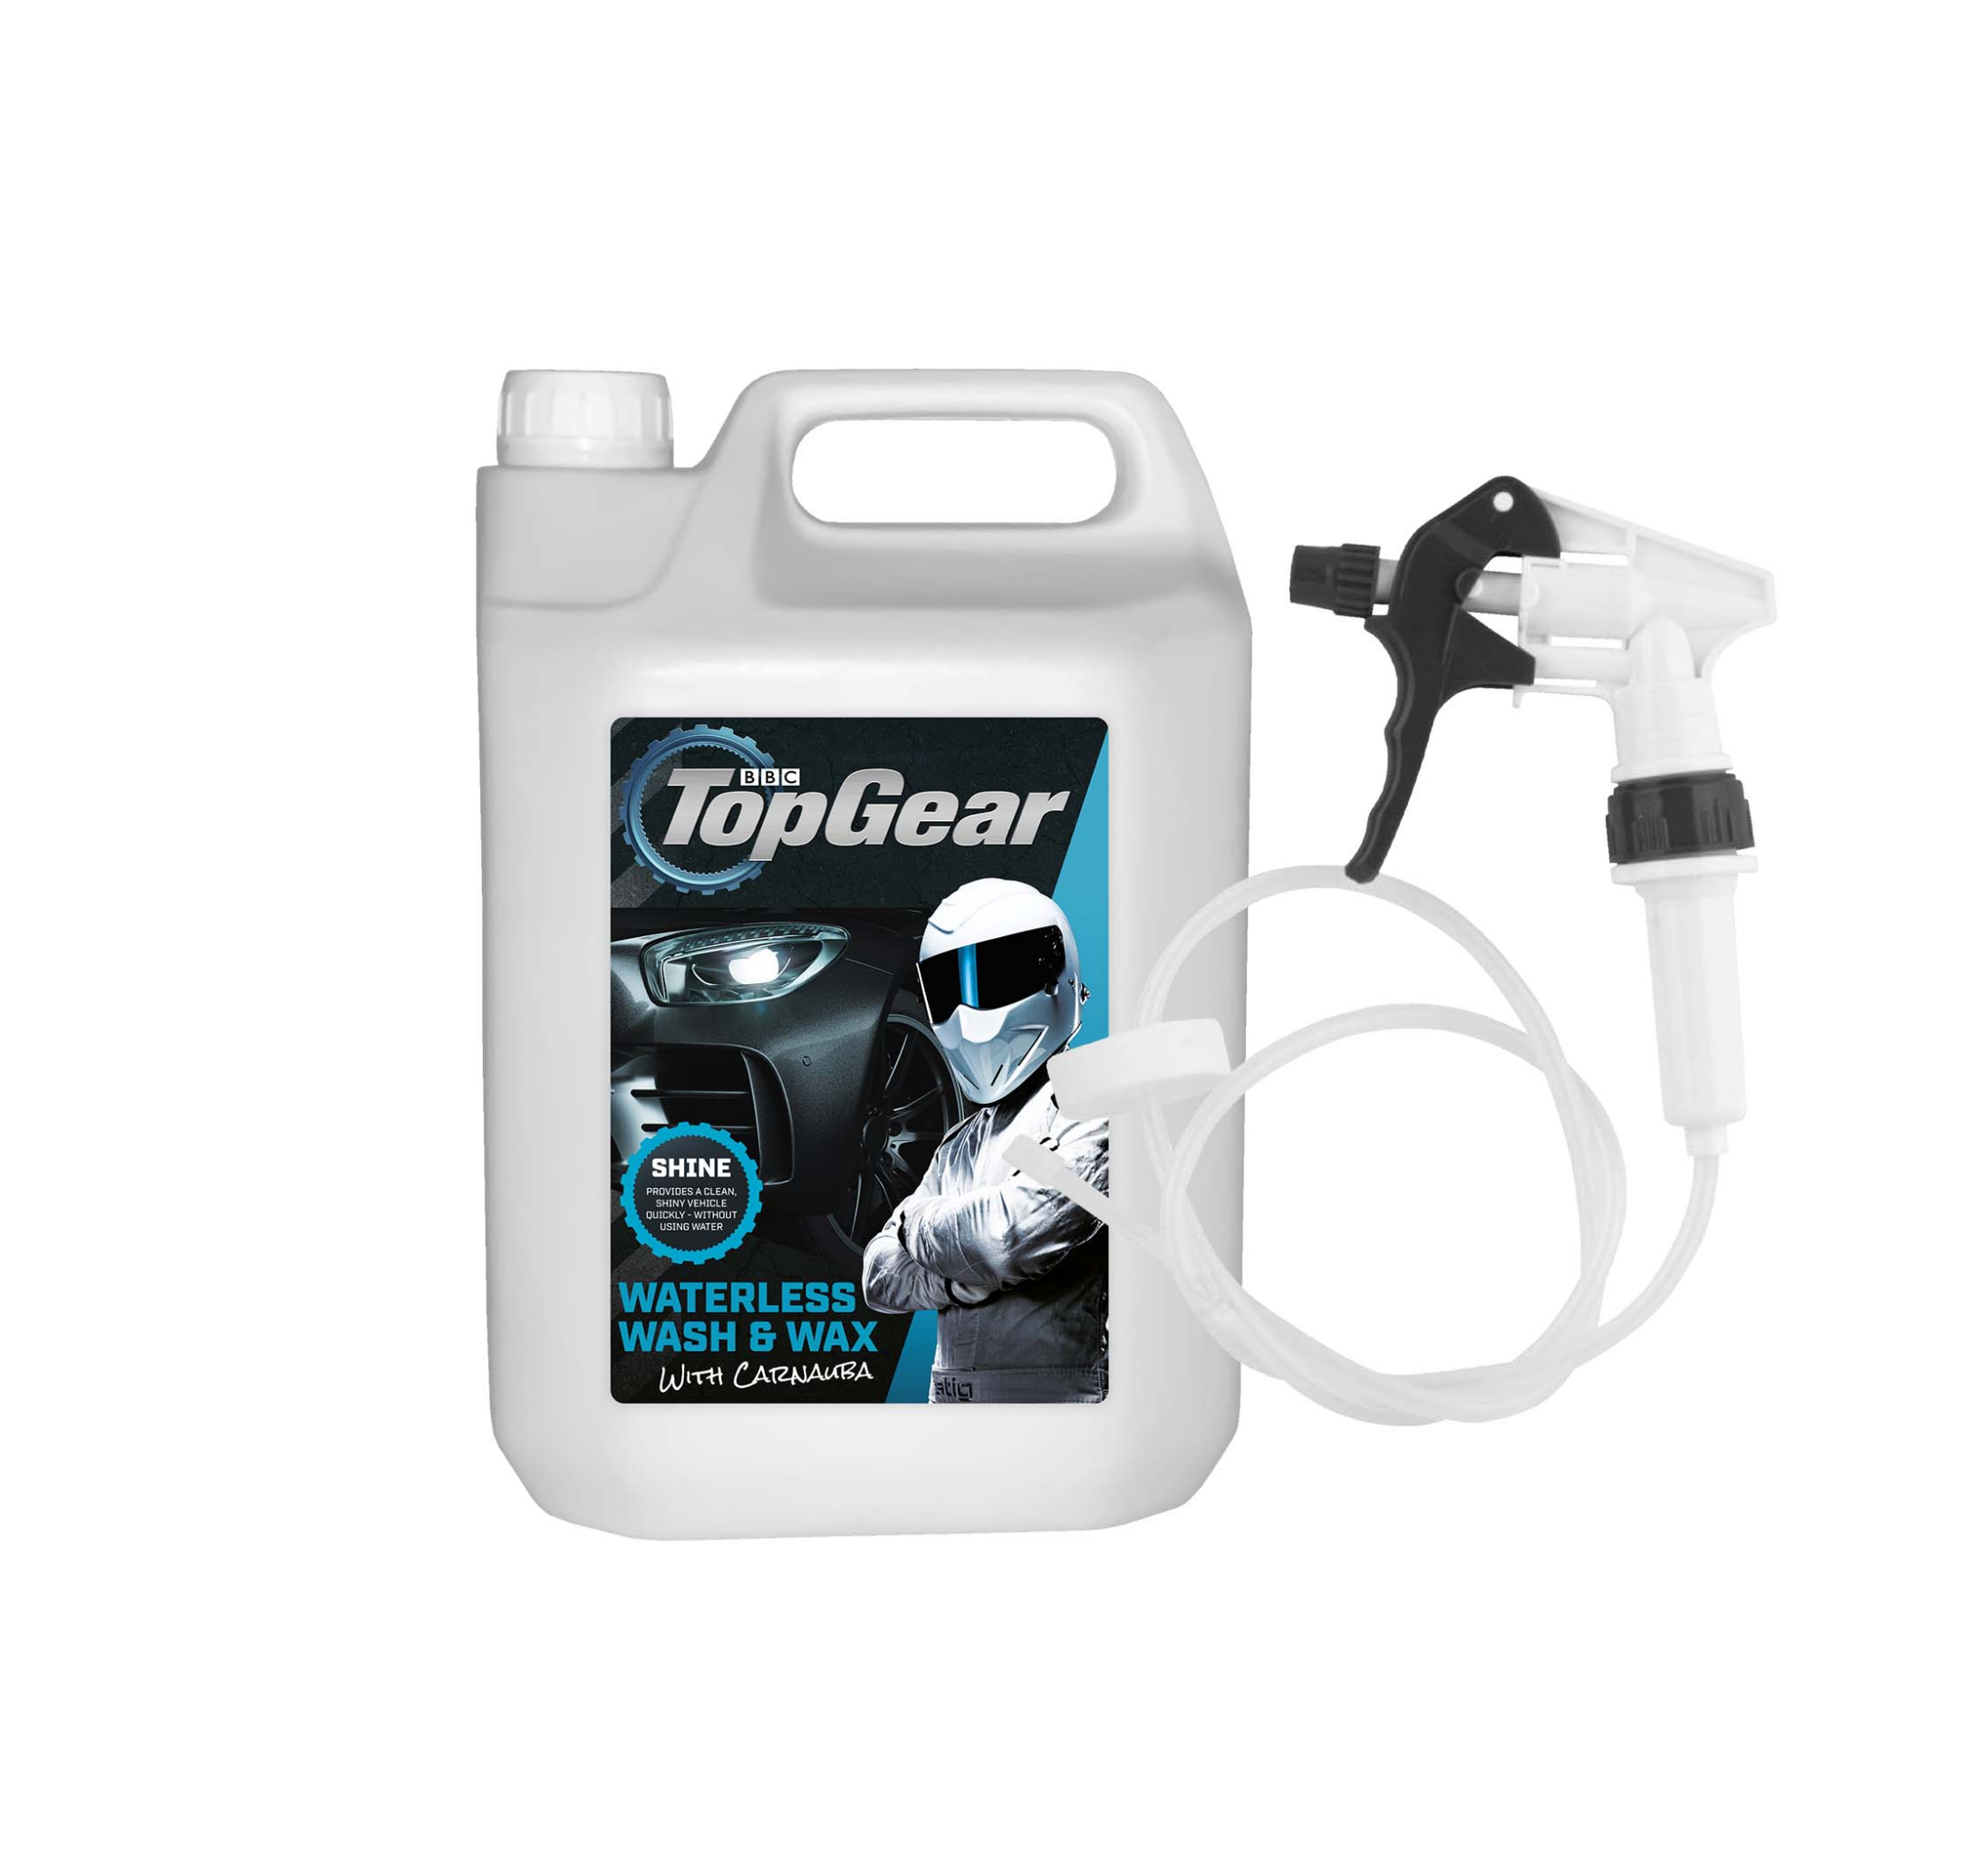 Top Gear Waterless Wash & Wax 5L (with Long Hose Trigger)